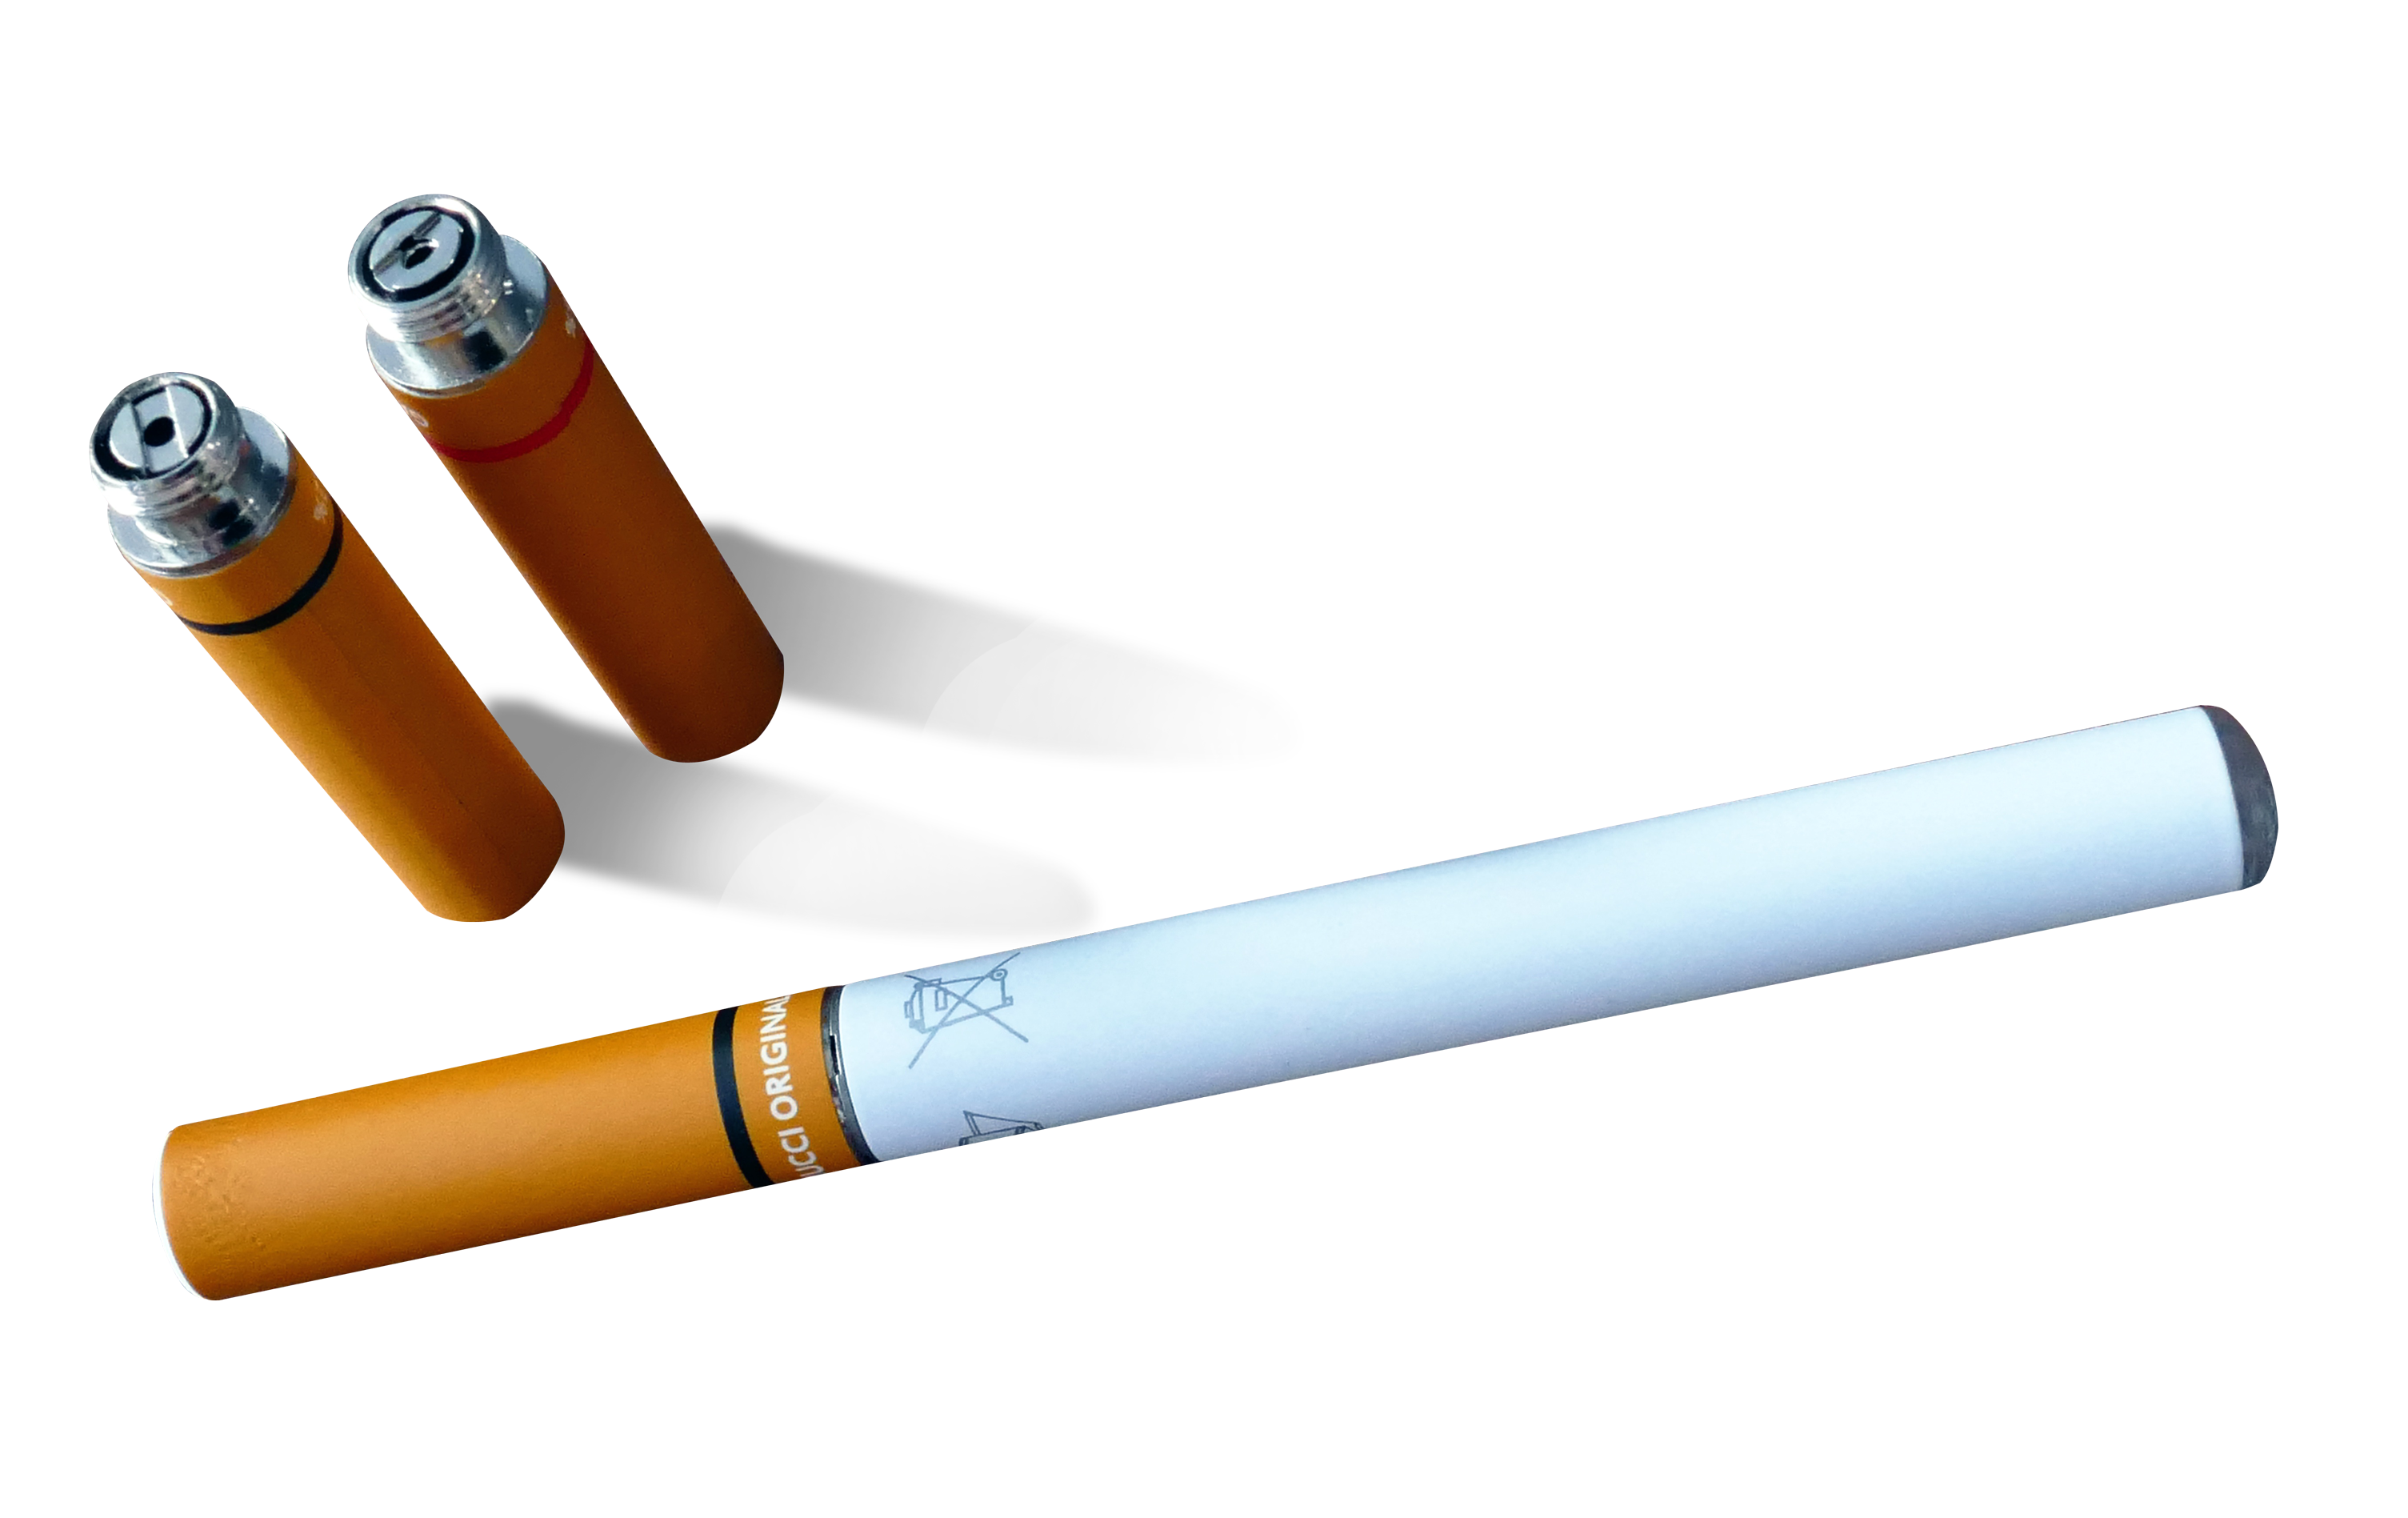 electronic cigarette png